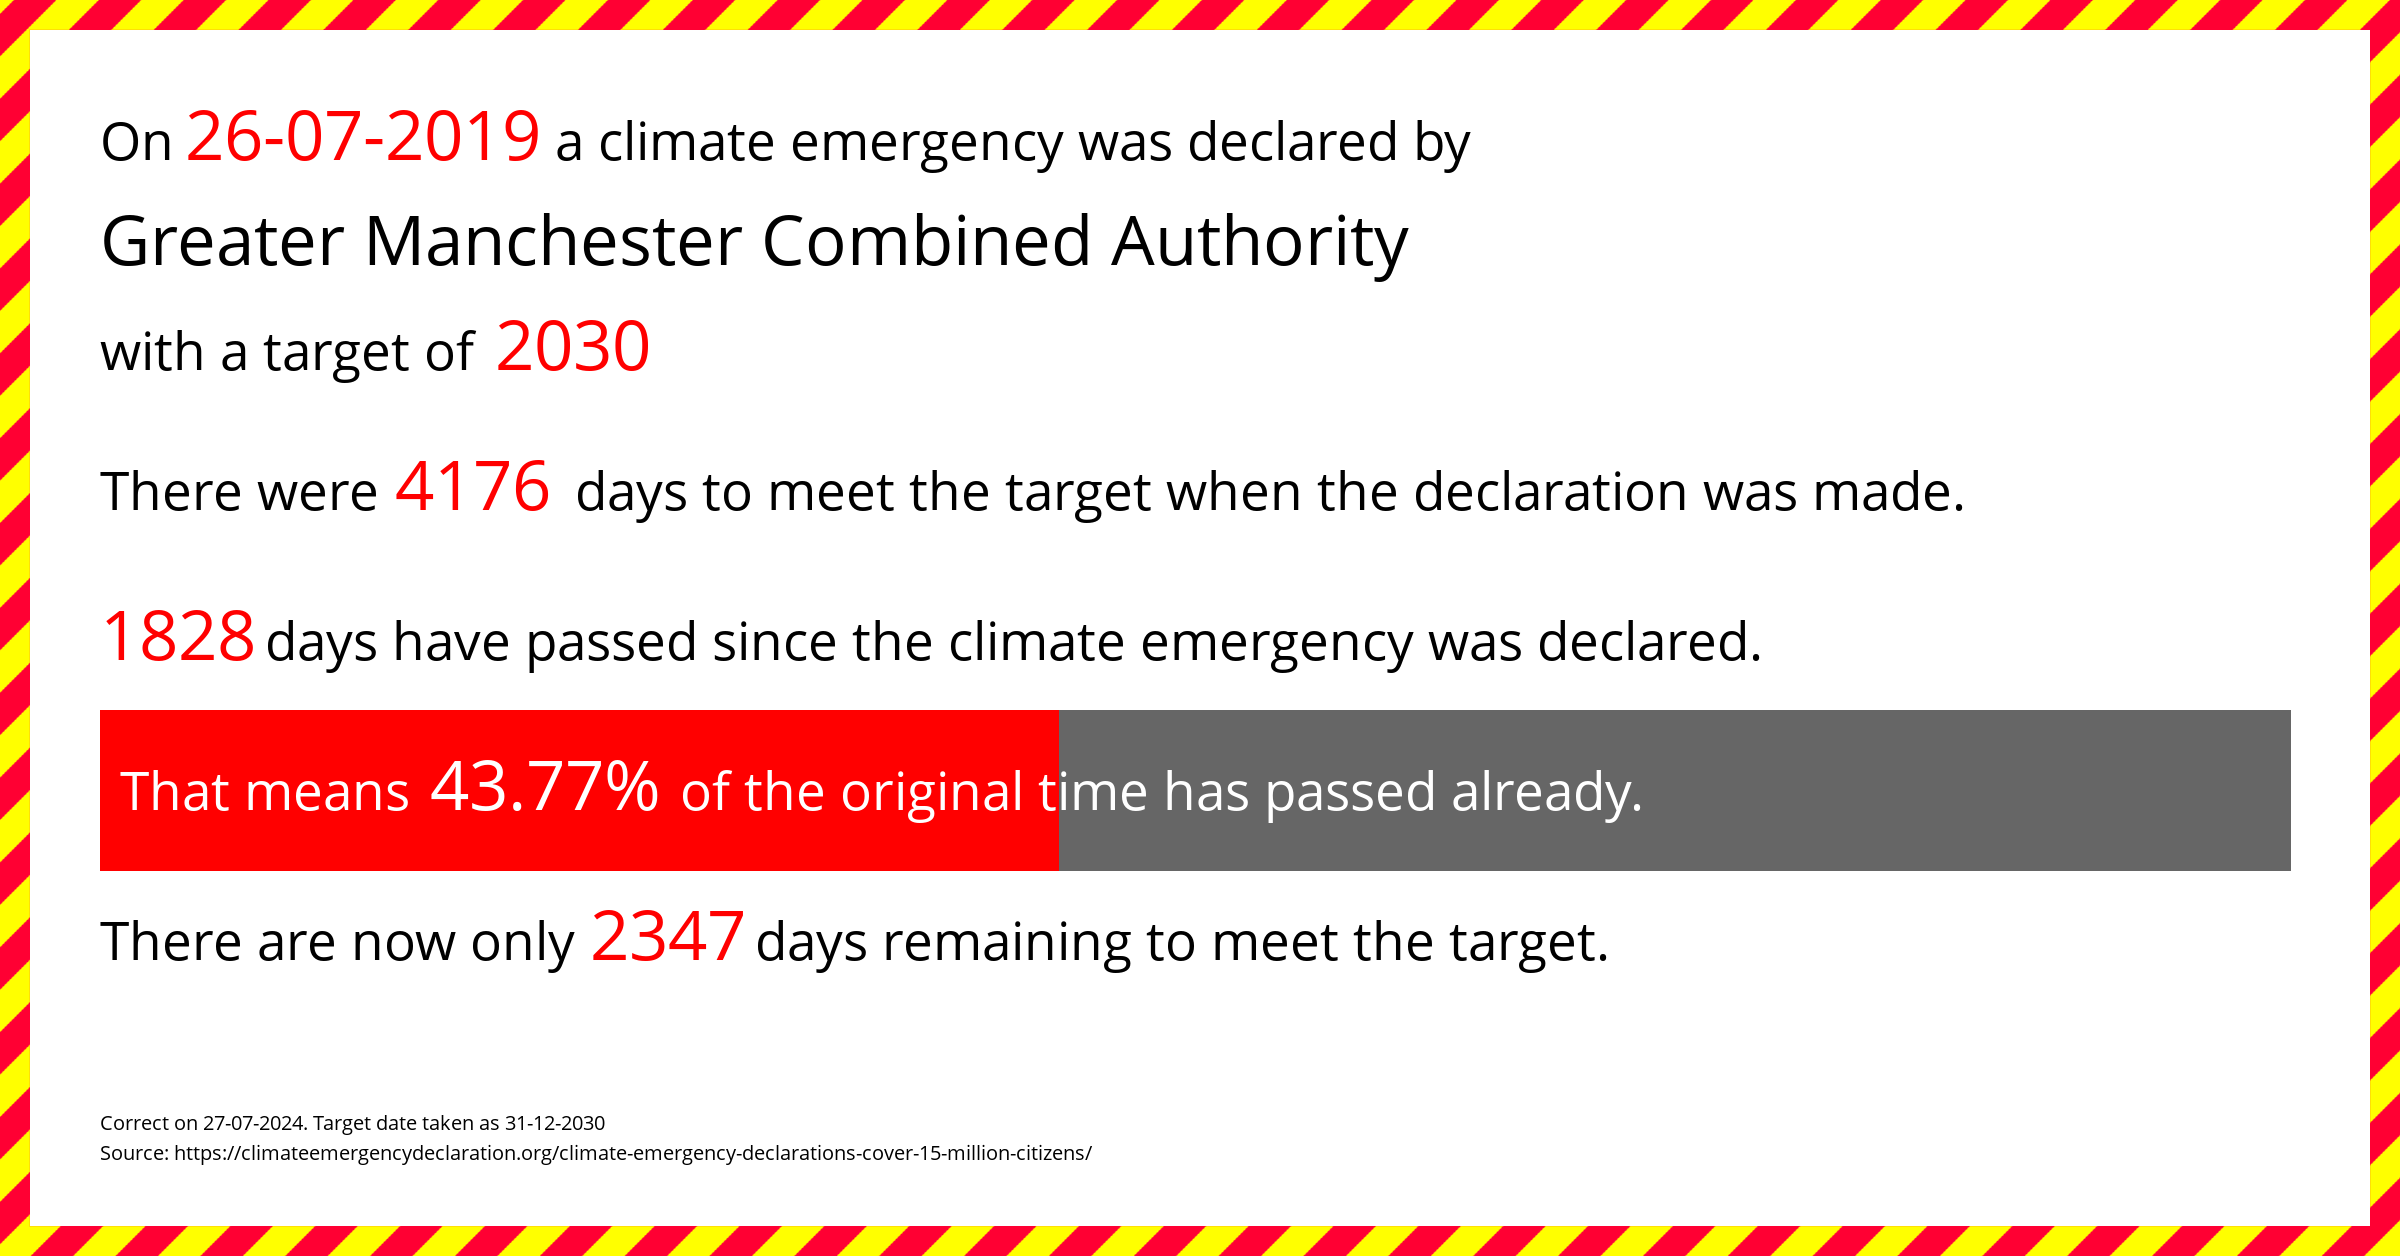 Greater Manchester Combined Authority declared a Climate emergency on Friday 26th July 2019, with a target of 2030.